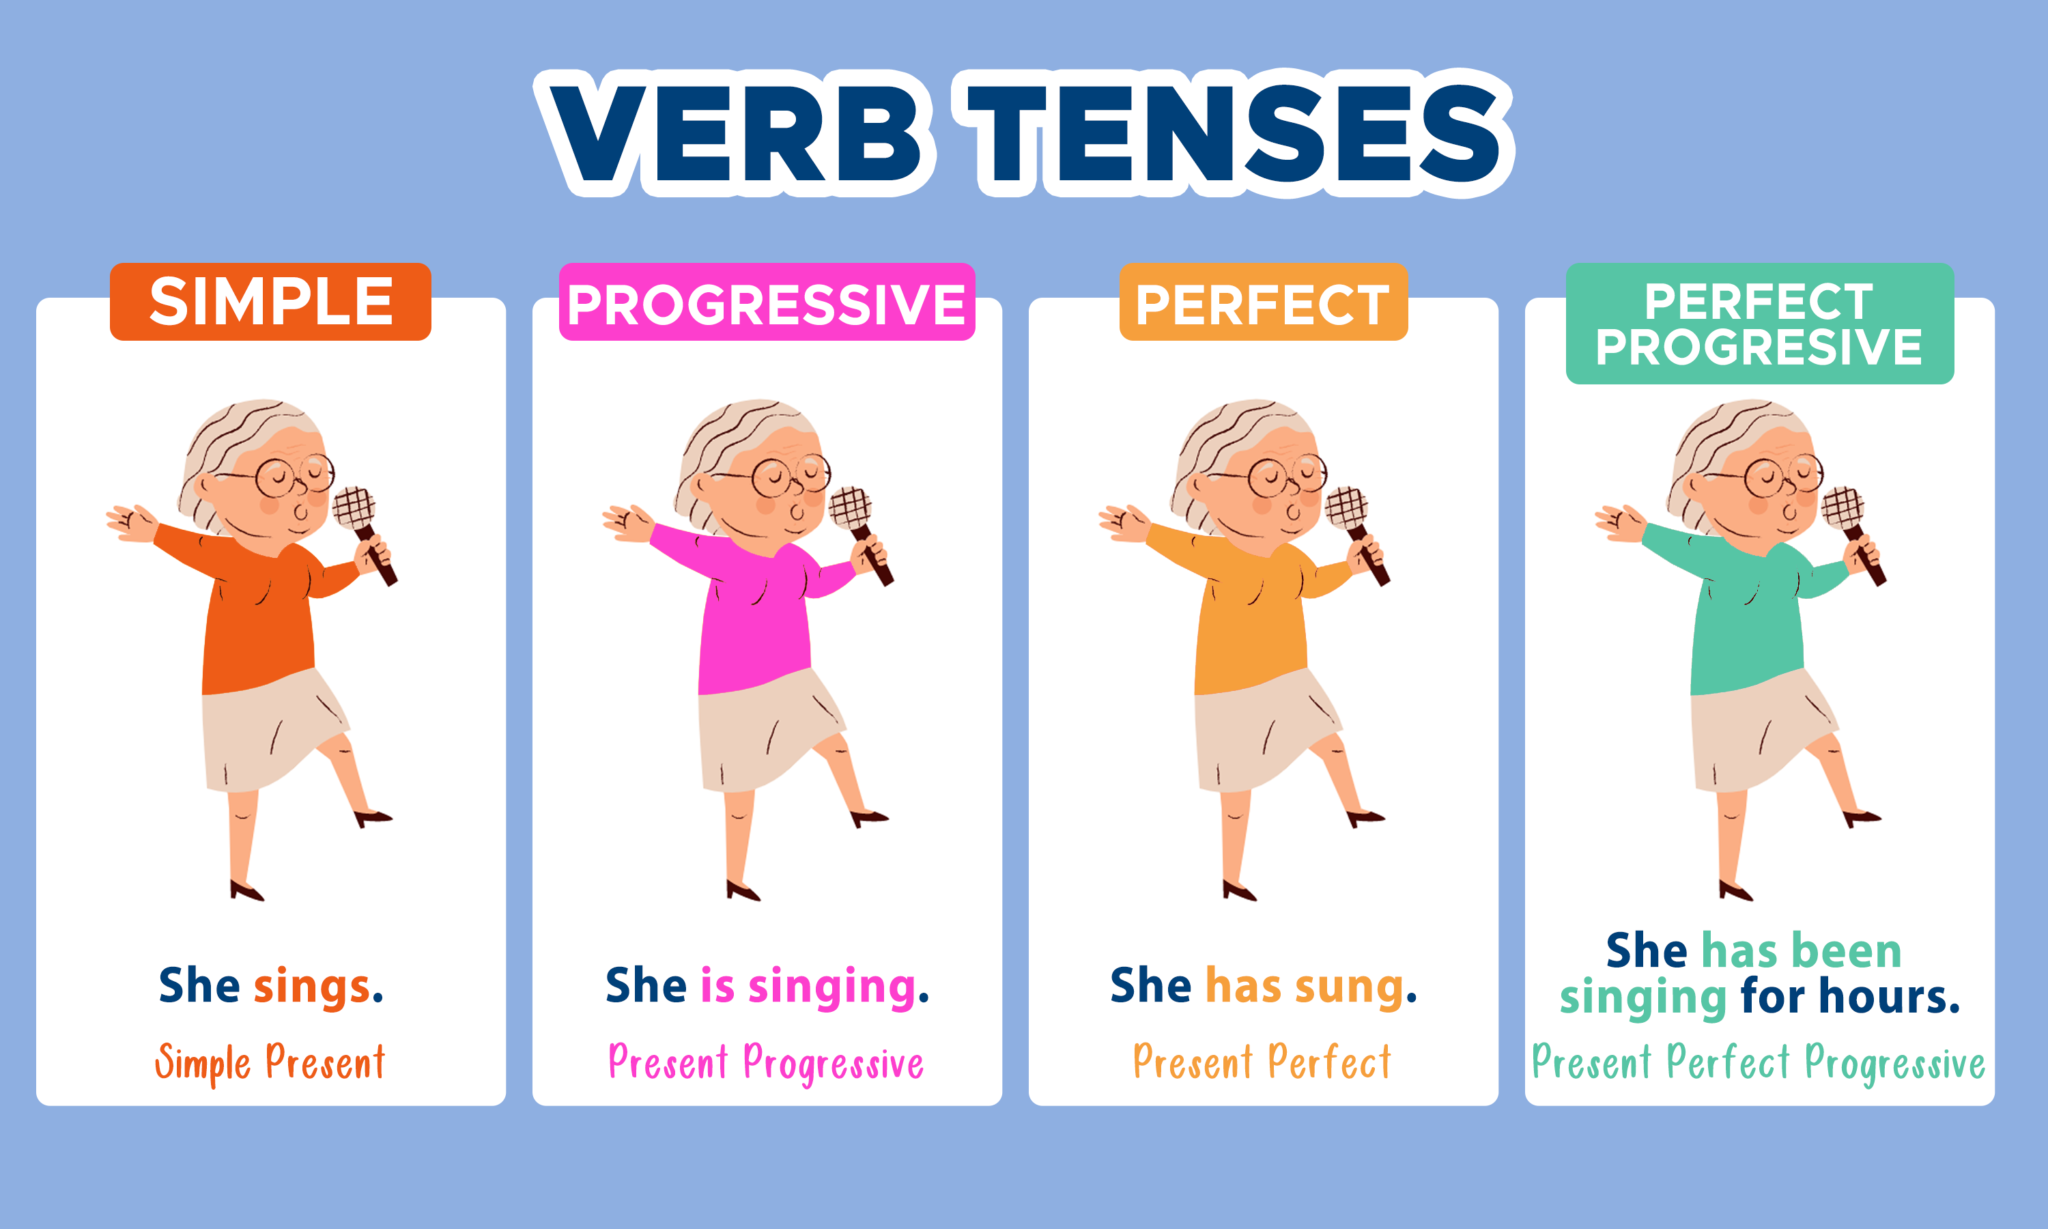 verb-tenses-when-an-action-occurs-curvebreakers